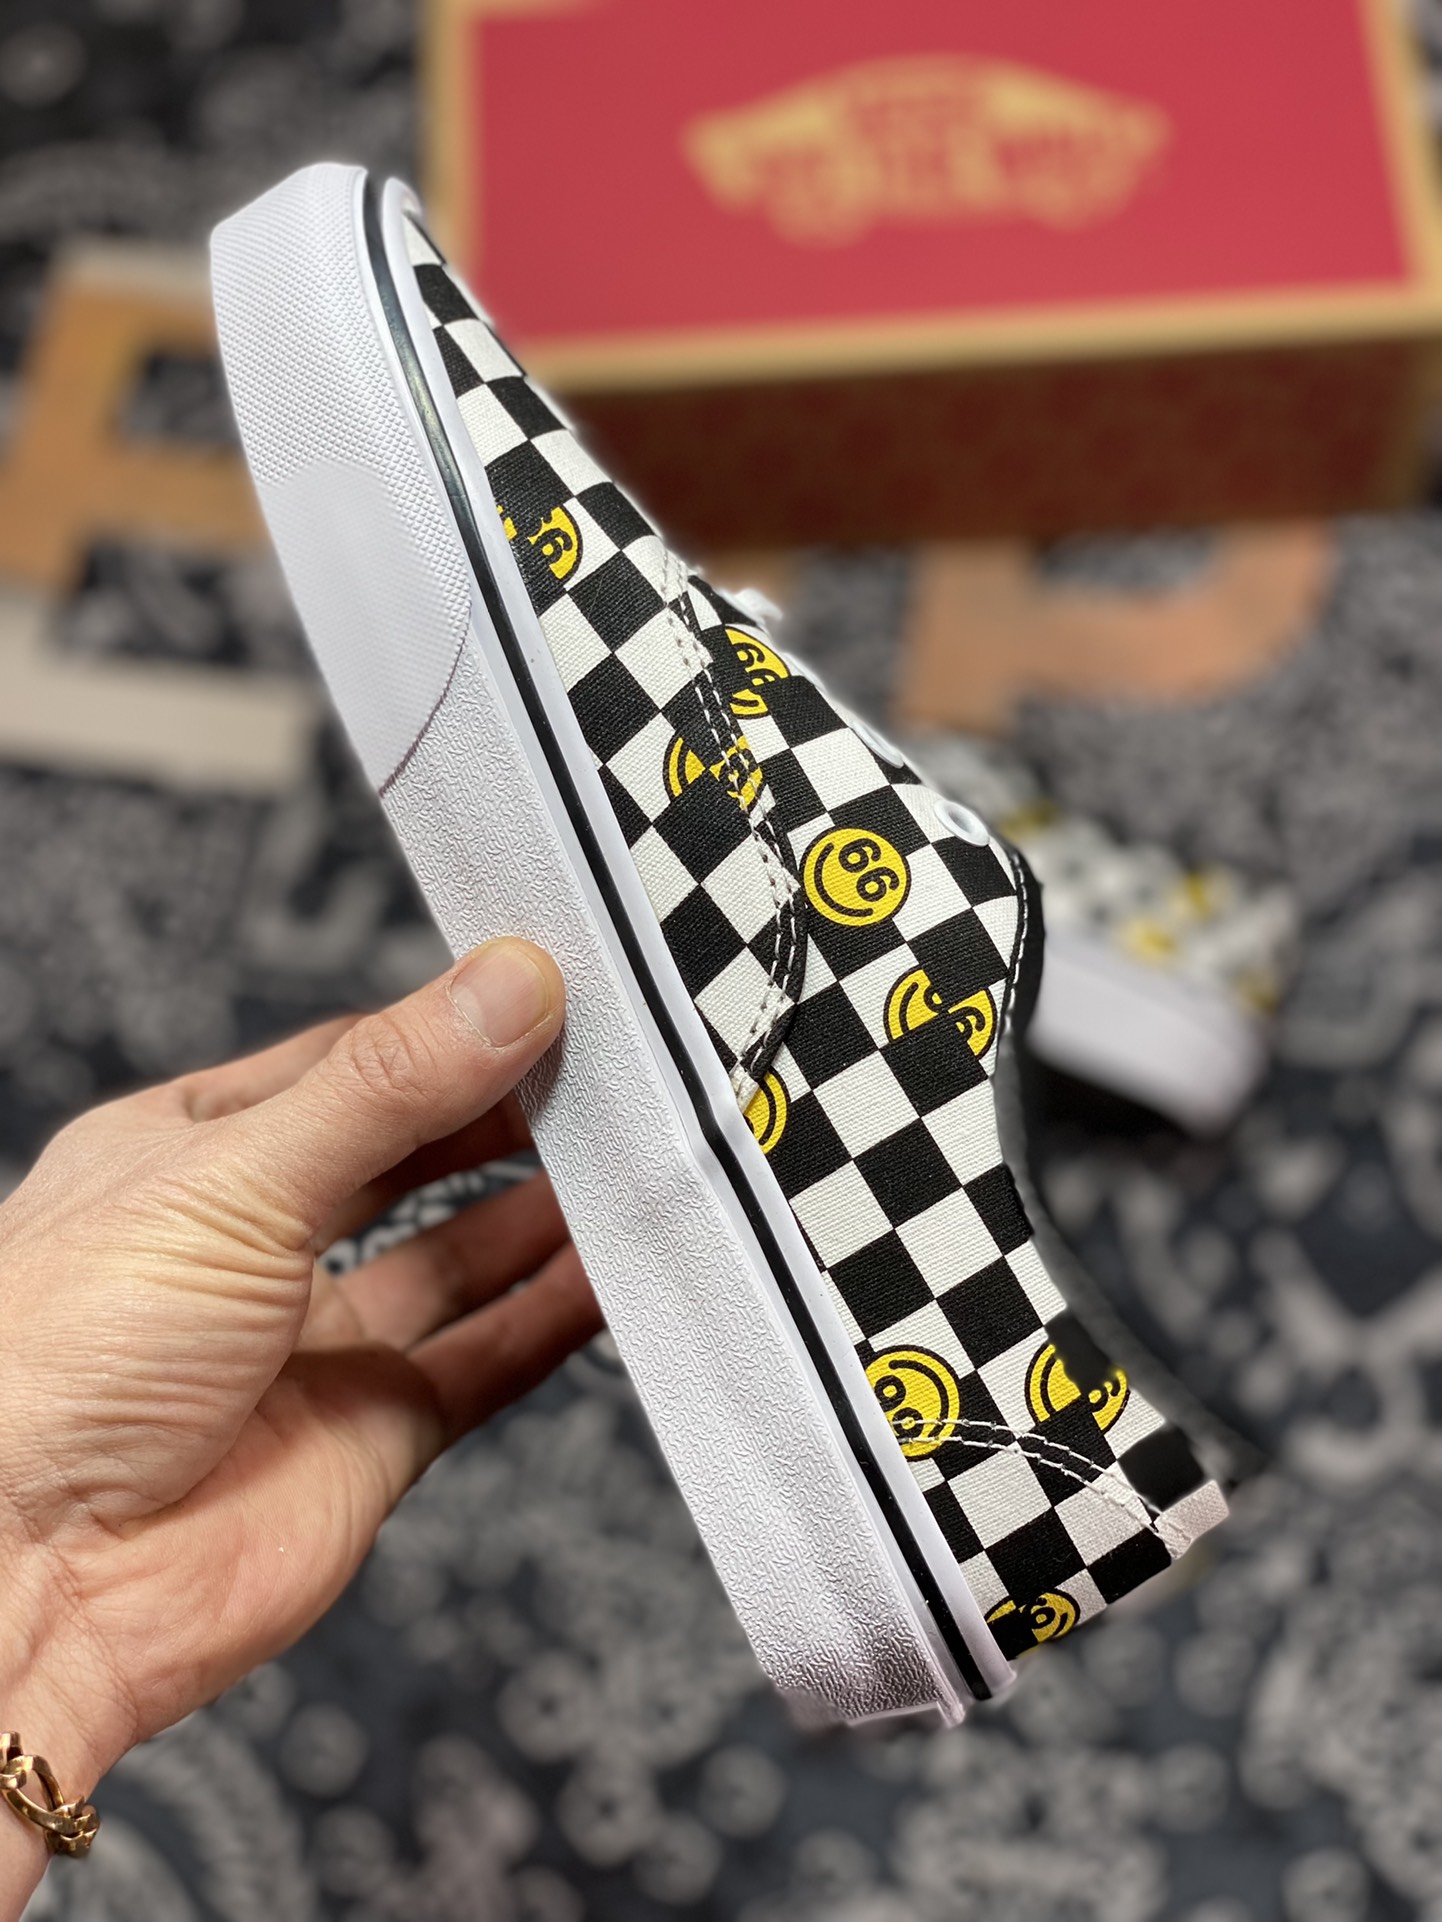 Vans Wallpaper Authentic Black and White Checkerboard Smiley Face 66 Printed Casual Canvas Shoes VN000EE3BP9